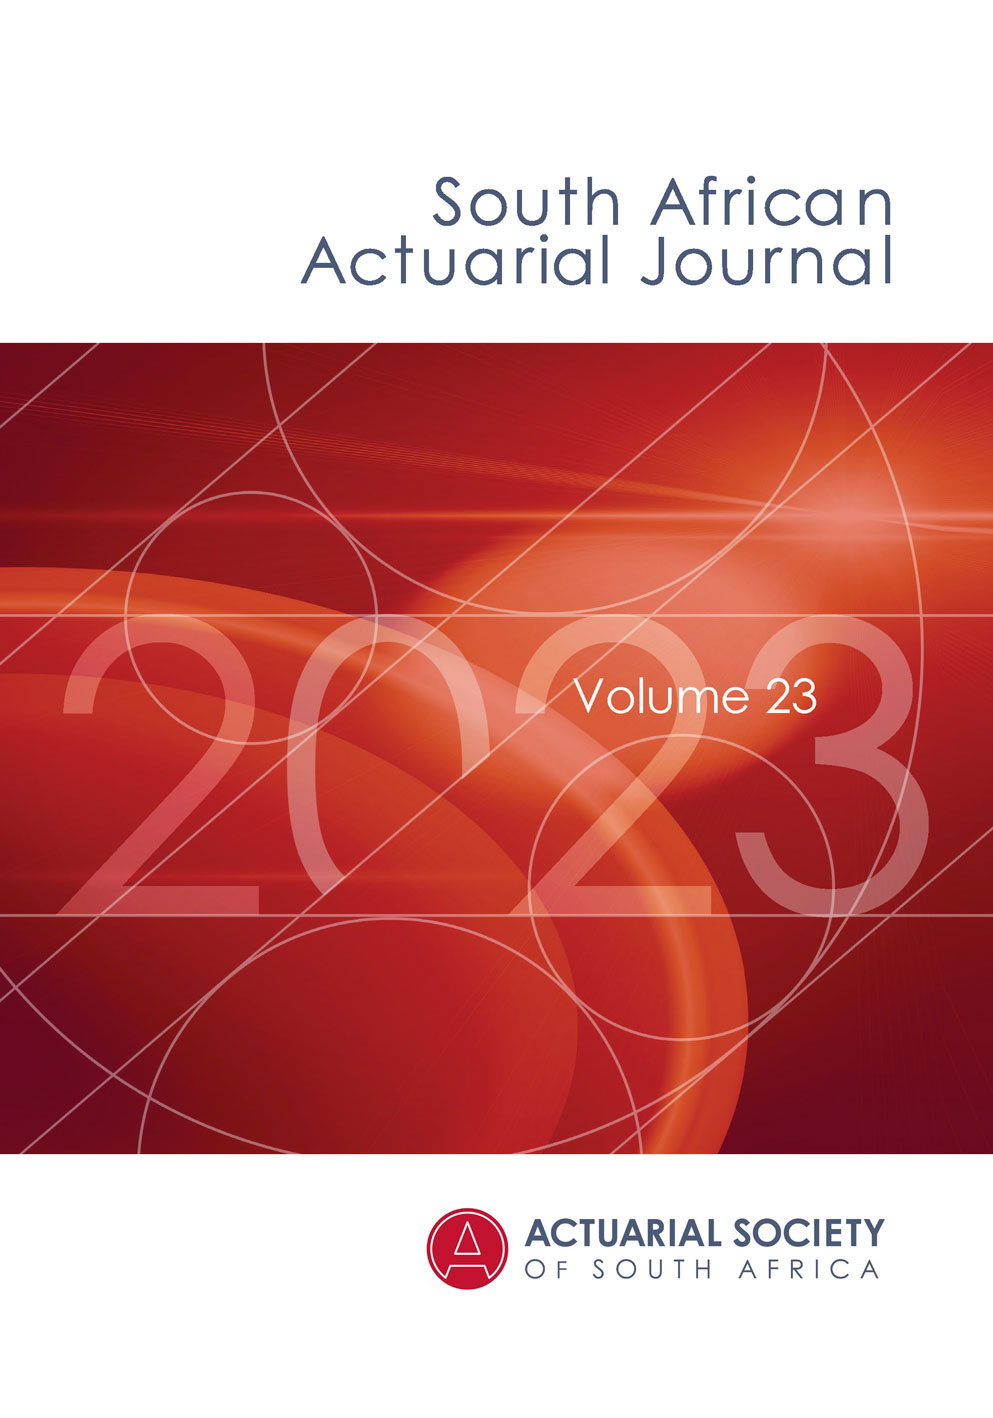 South African Actuarial Journal